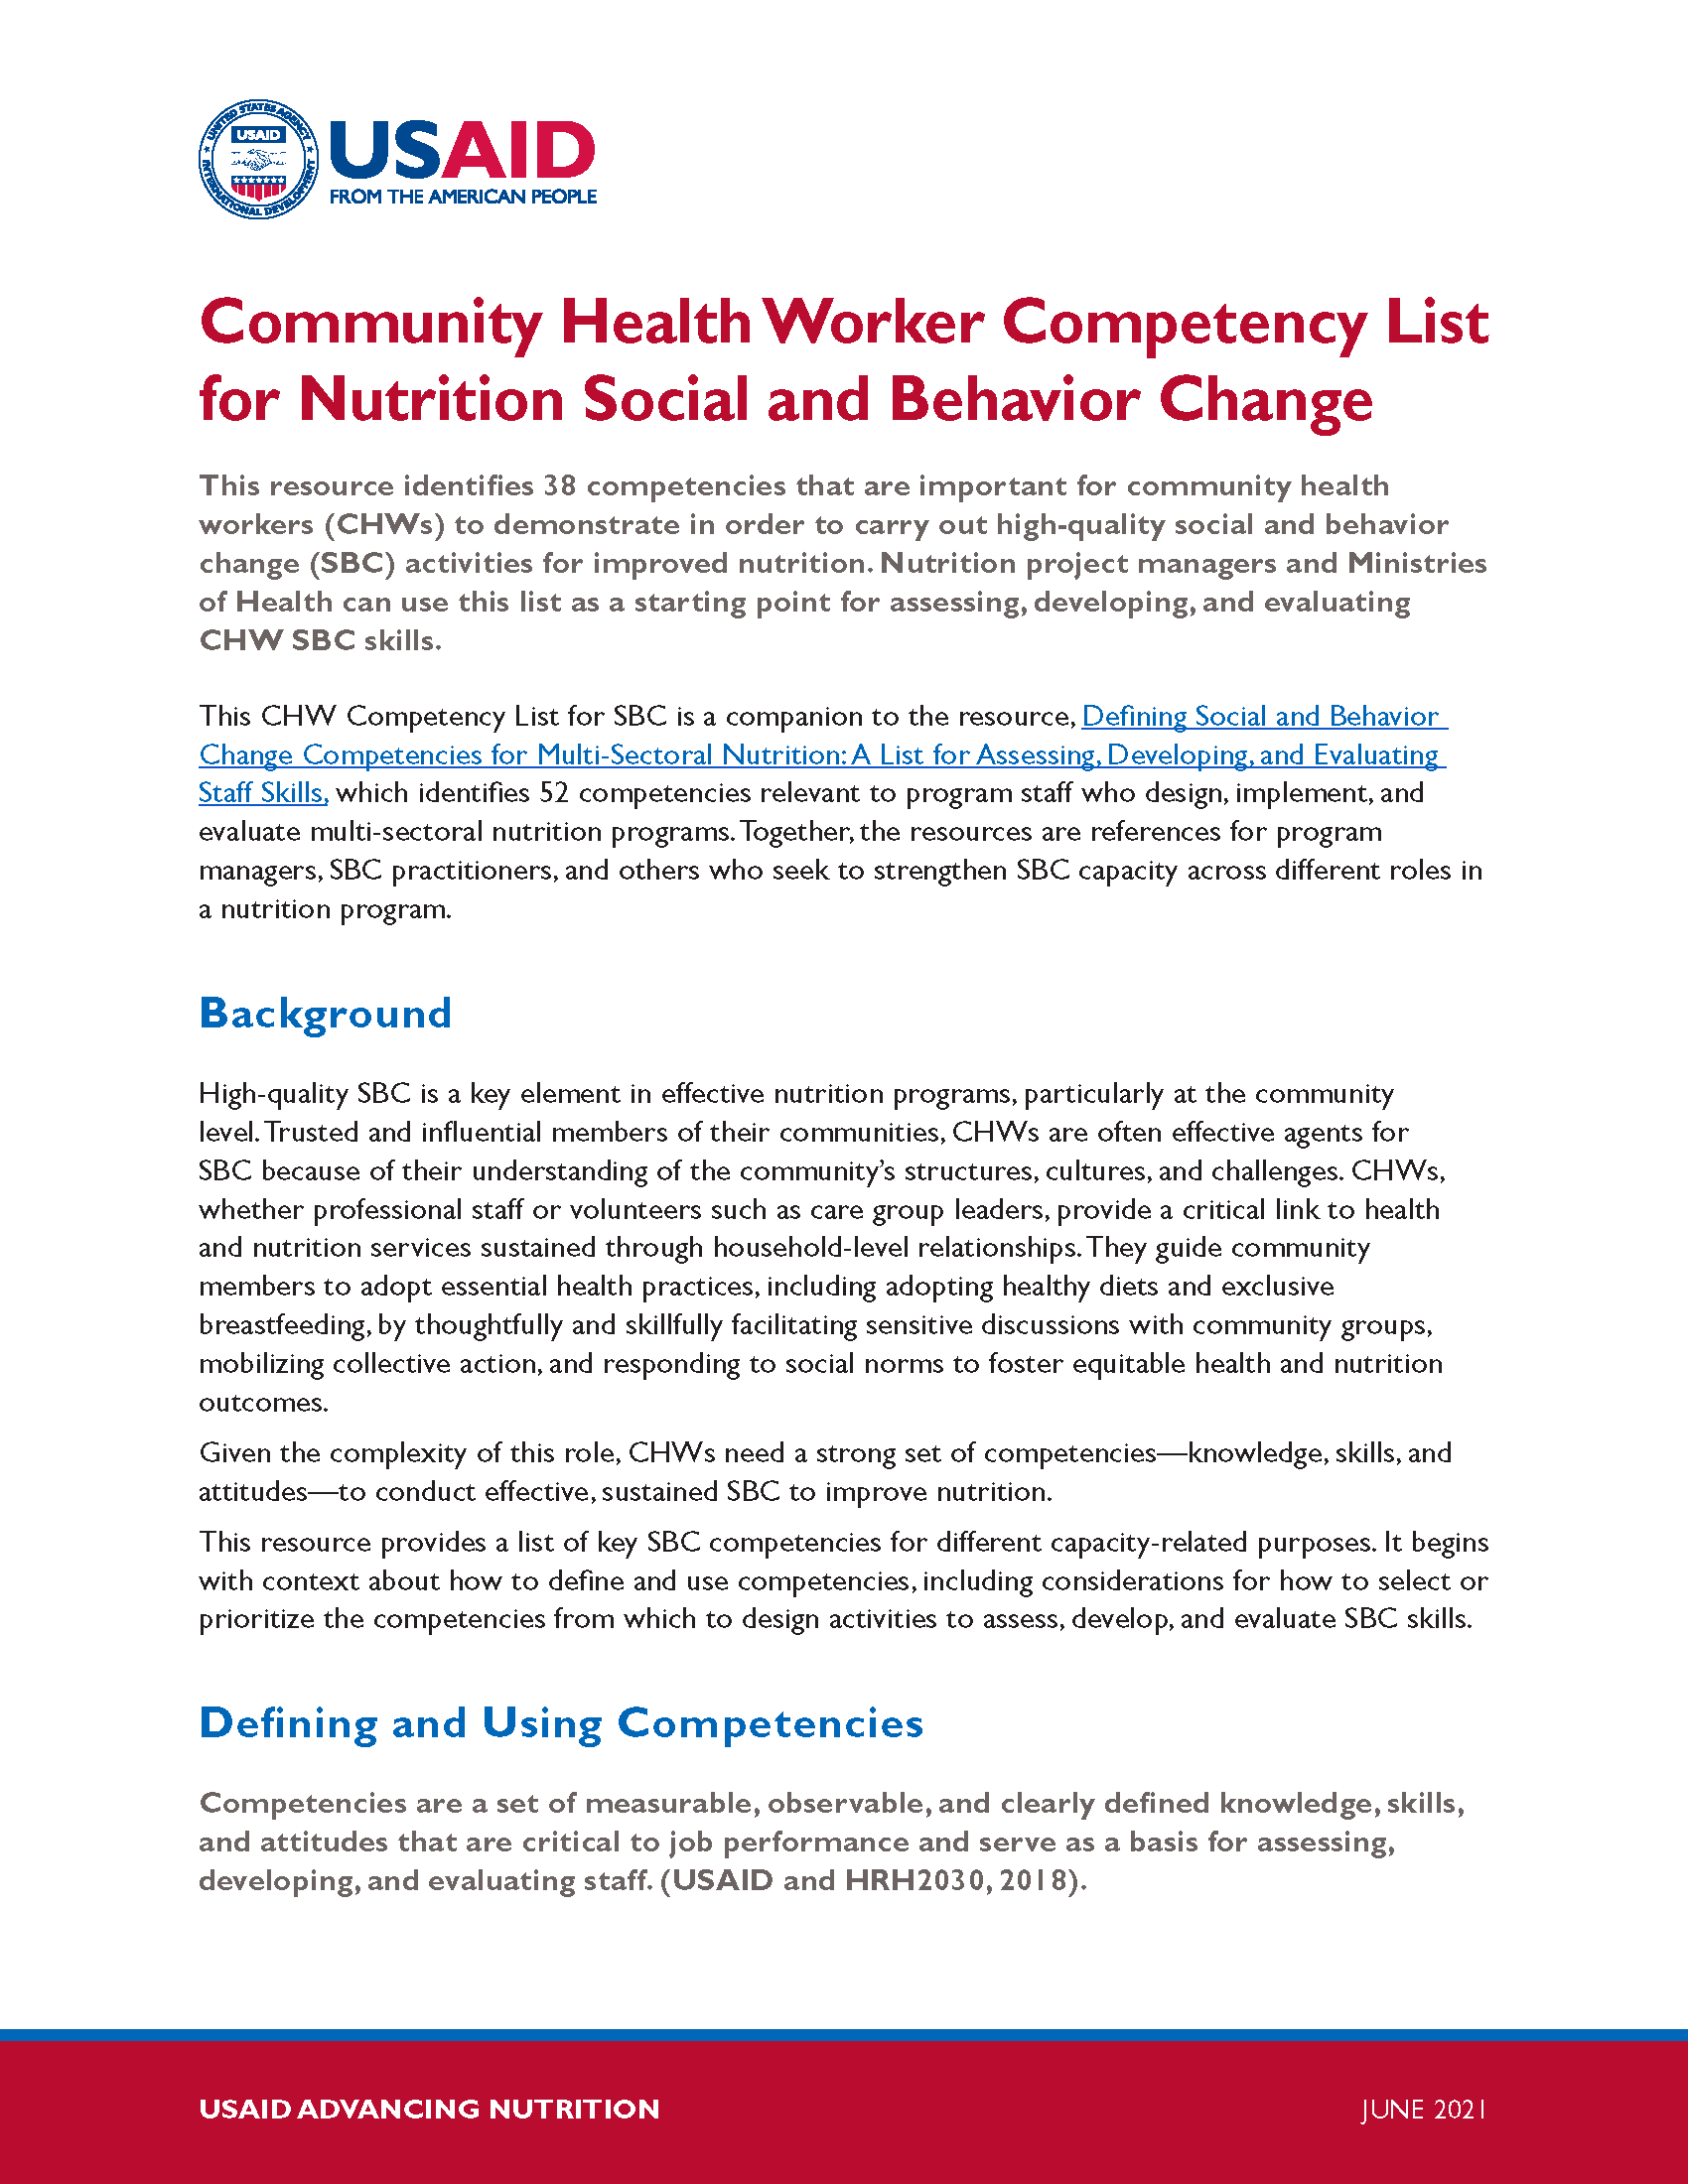 Cover page for Community Health Worker Competency List for Nutrition Social and Behavior Change